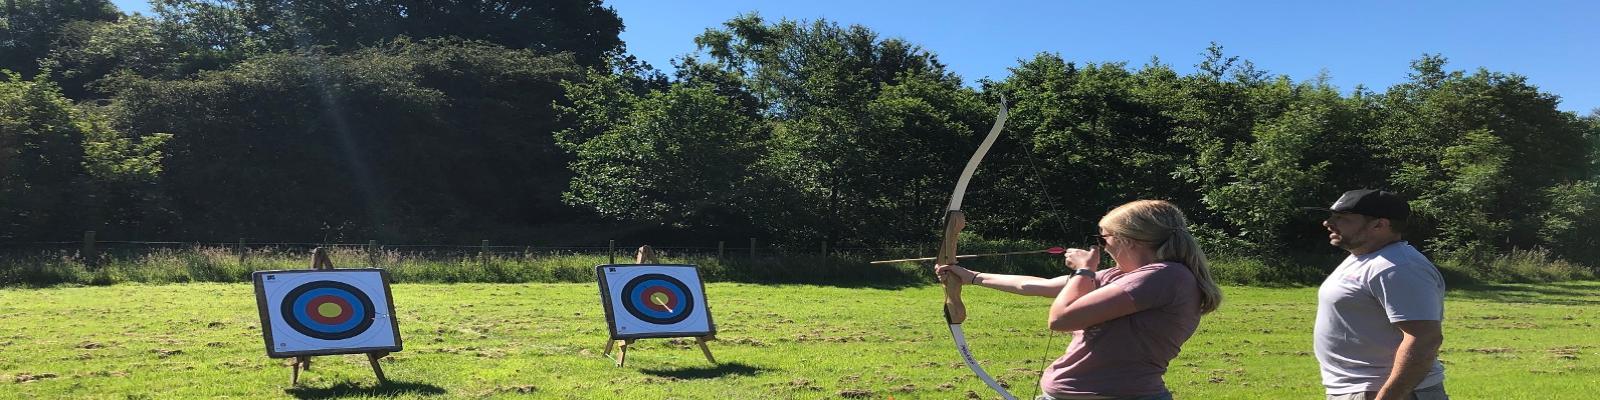 Person taking part in archery class